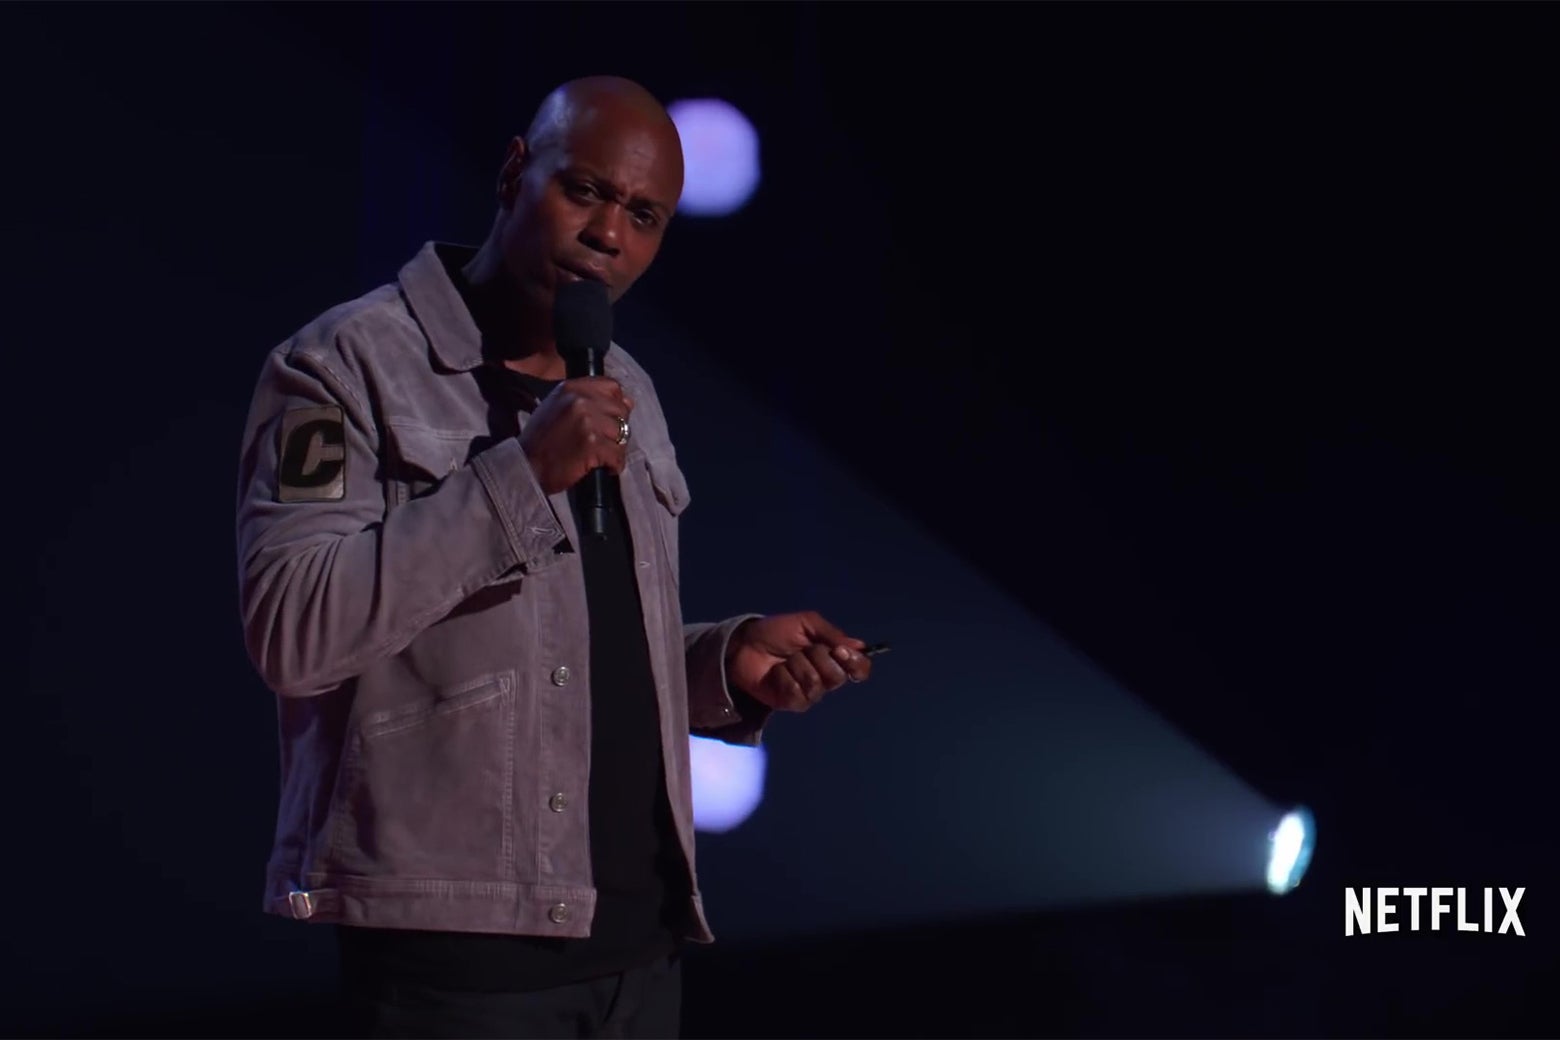 Watch a clip from Dave Chappelle’s Netflix special.